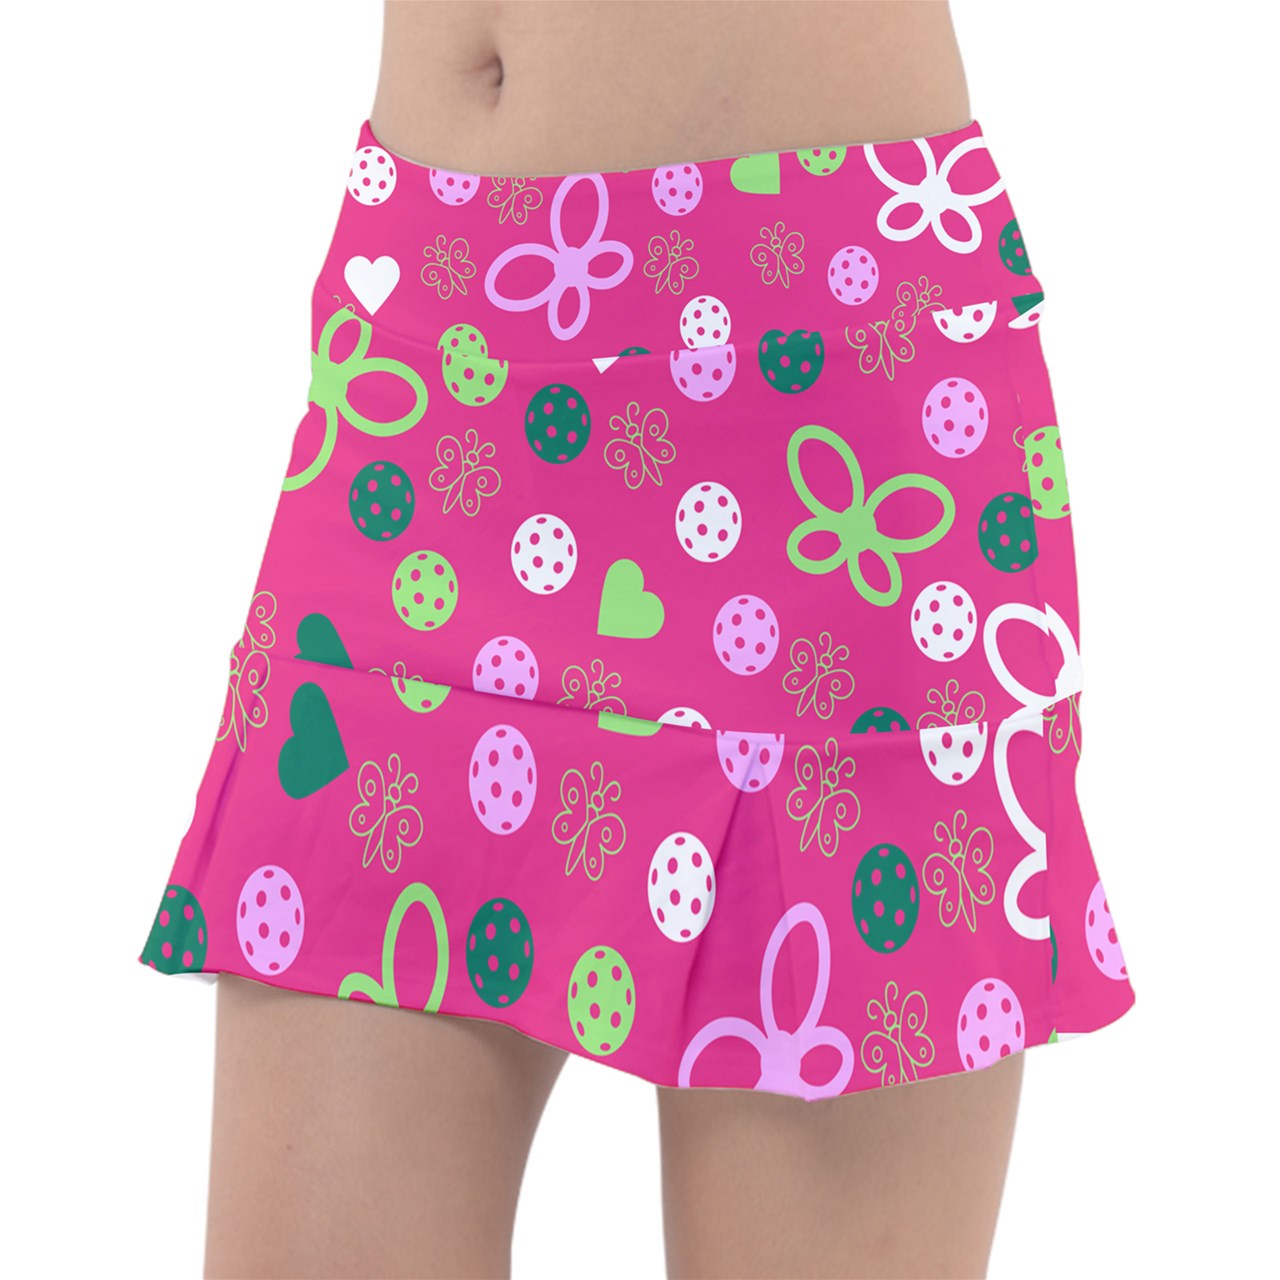 Penny - Pink/Green - Classic Pickleball Skort by Dizzy Pickle